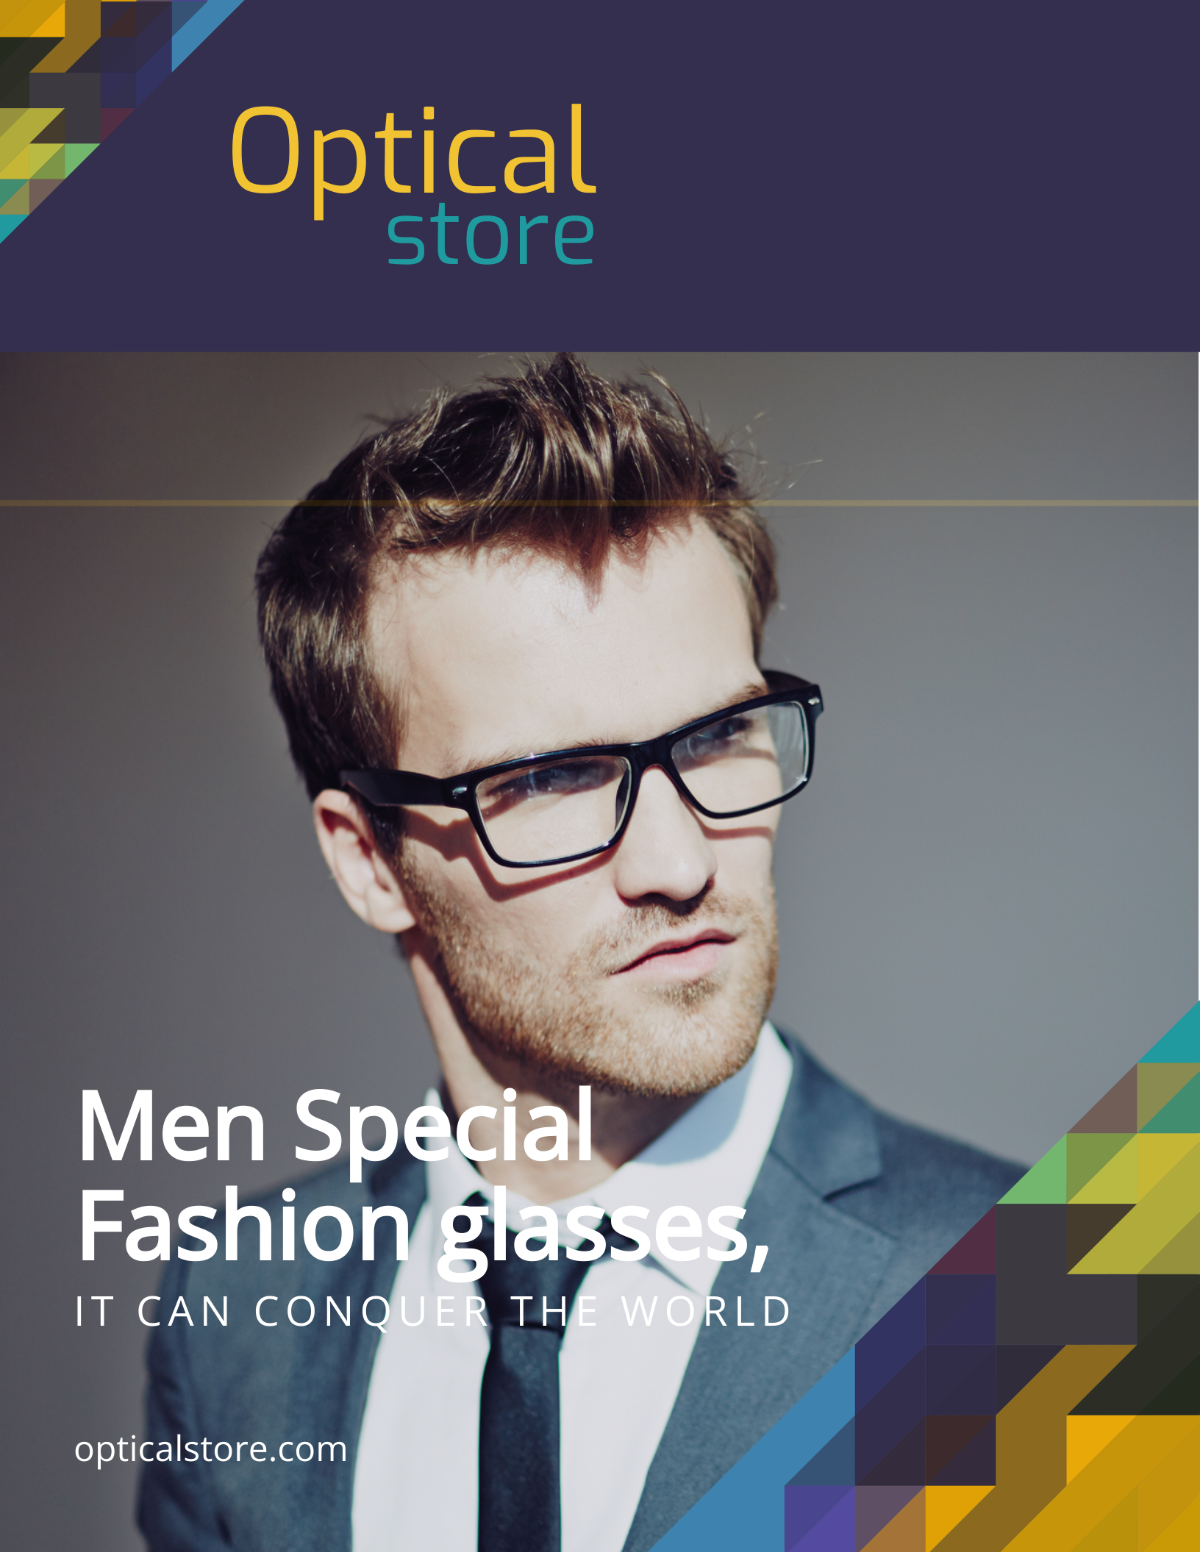 Optical Store eBook Cover Template